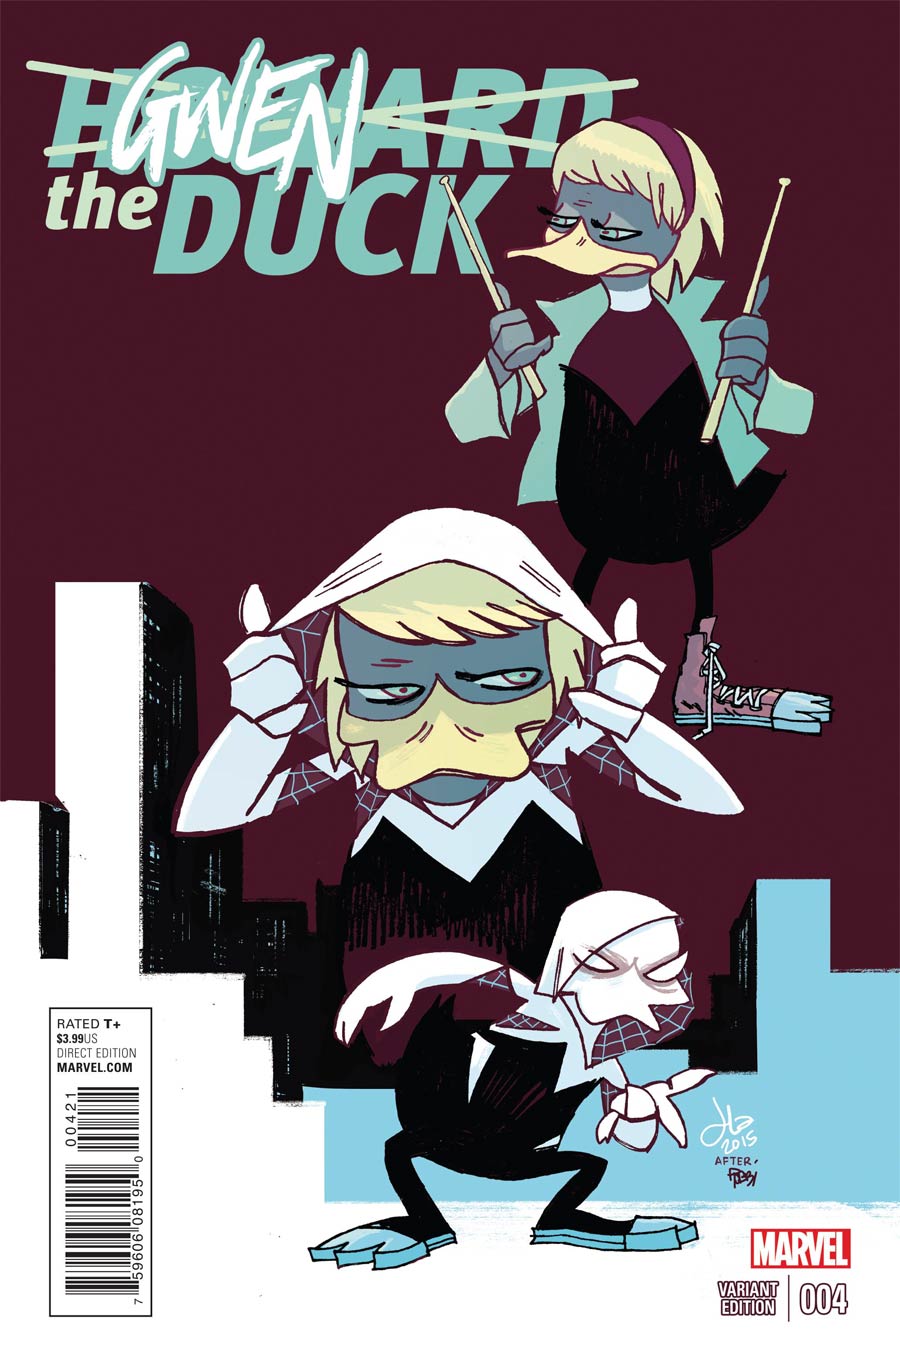 Howard The Duck Vol 4 #4 Cover B Variant Jason Latour Gwen The Duck Cover